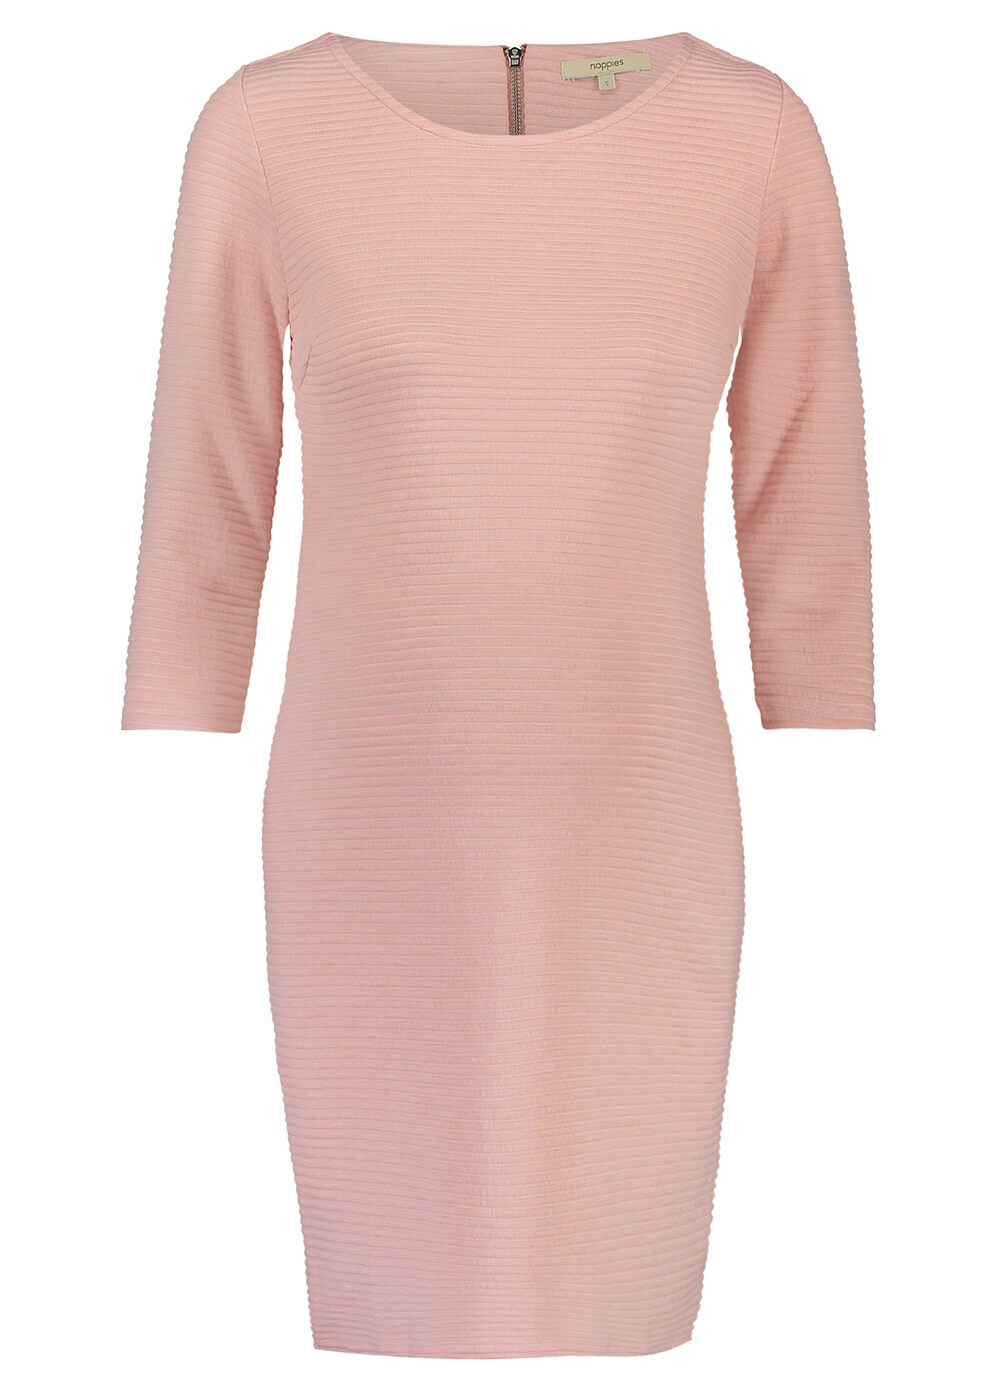 Zinnia Textured Ribbed Pregnancy Dress in Peach by Noppies